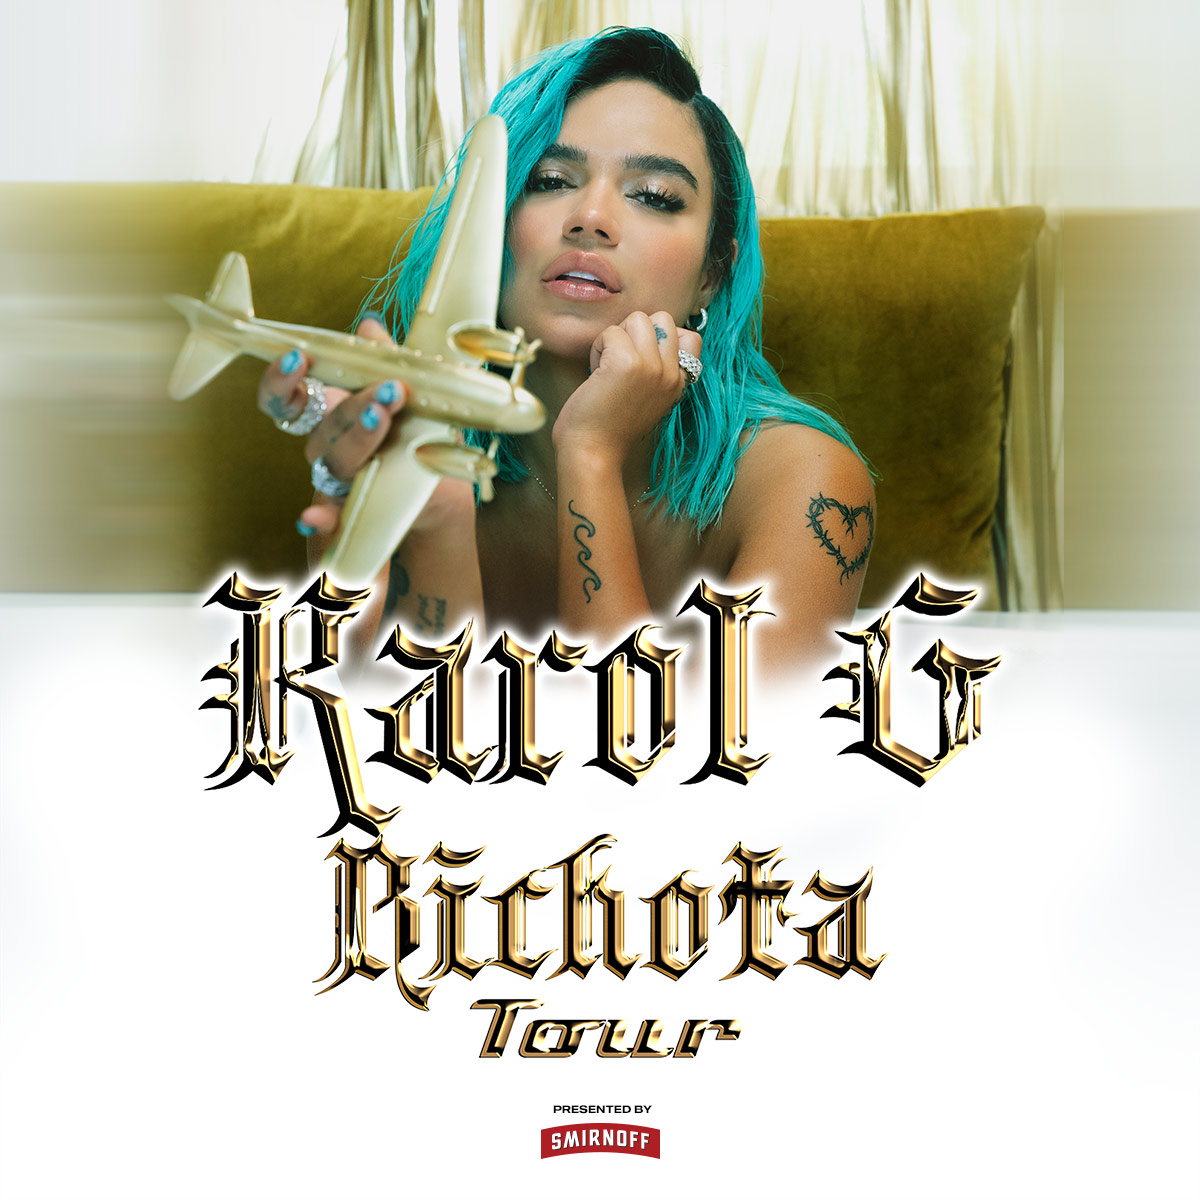 Karol G's Songs Conquered the World. On a New LP, She Reveals